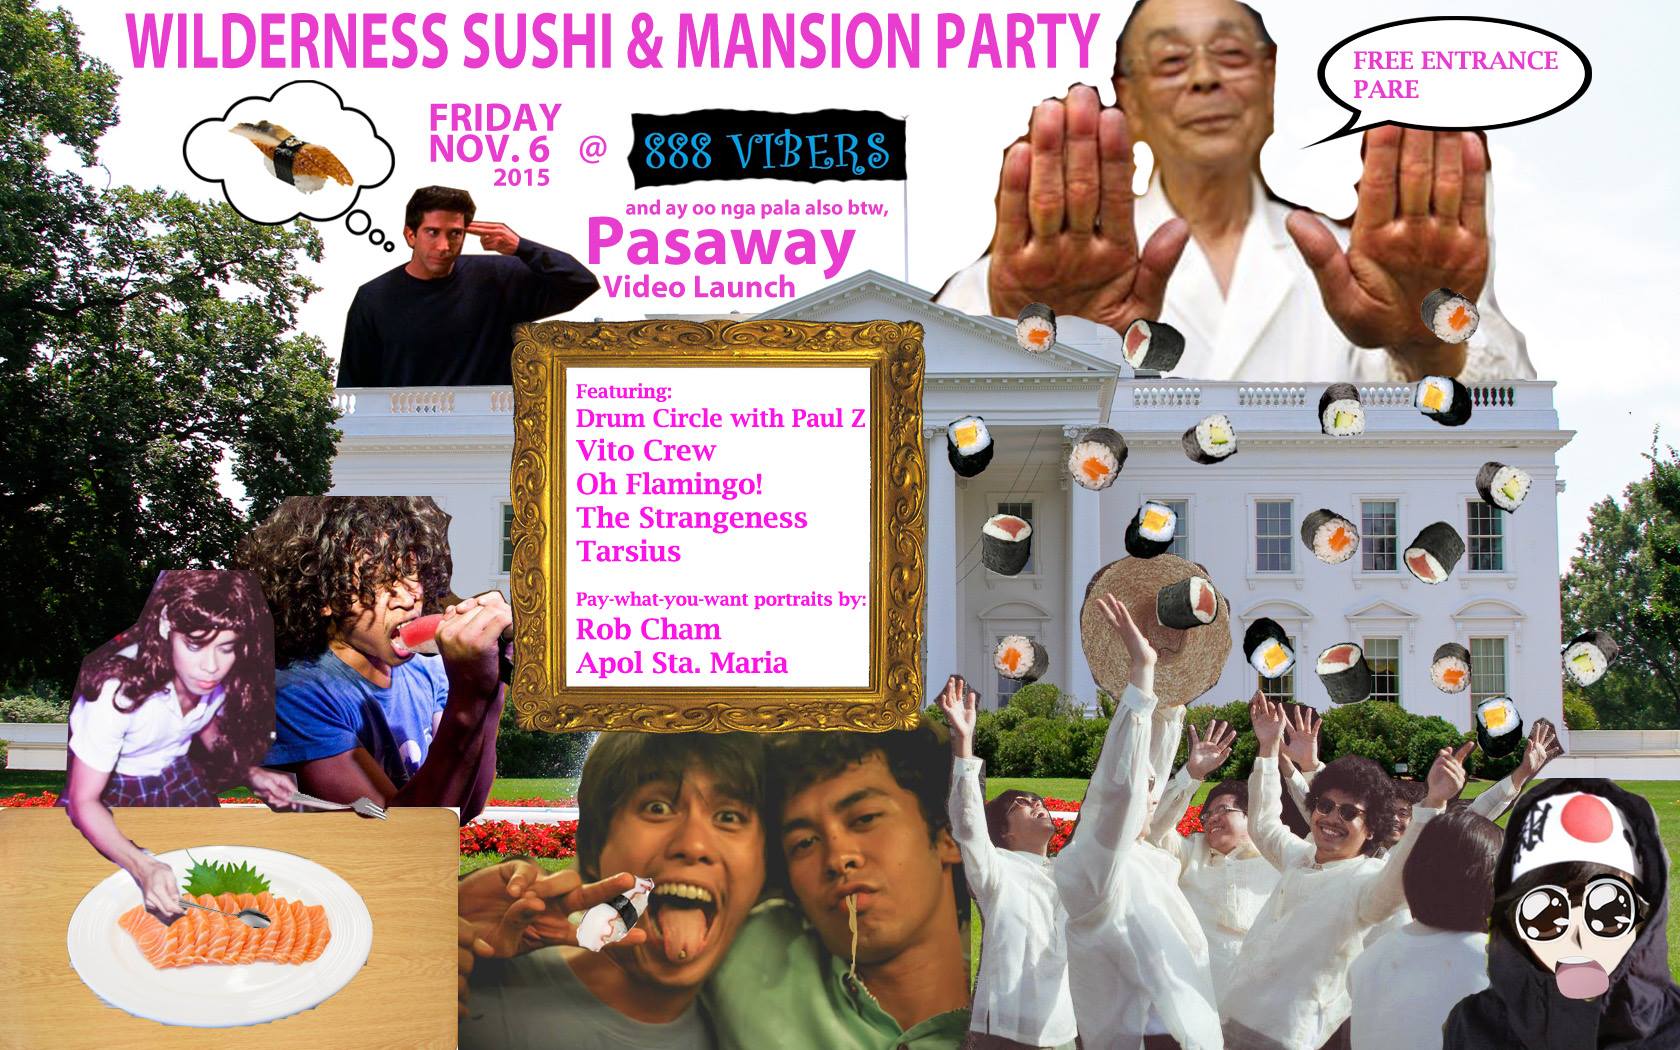 WILDERNESS Sushi & Mansion Party and ay oo nga pala also btw, PASAWAY Music Video Launch! Friday, November 6 at 7:00pm Next Week Show Map 888 Vibers Bar & Resto Leveriza Street, Pasay City, Philippines Our highly anticipated music video for PASAWAY is finally done and ready for the world! To live up to the top-notch quality of the production, we've decided to host a party to celebrate the divine connection between music and the visual arts. This is going to be a night filled with activities to stimulate your senses and creative juices. Activities: - Drum circle lead by percussion master, Paul Z by the beer garden - Pay-what-you-want portraits by the highly talented trio, Rob Cham, Apol Sta. Maria and Mek Yambao - Tarot reading by a special mystical guest - Music video screening - Musical performances by Vito Crew, Oh Flamingo!, The Strangeness, Tarsius, and Wilderness There is no entrance fee! Instead, grab a plate of sushi, have your portrait done, grab a few beers, or cop a bottle of Wilderness lambanog! The night is yours! Choose your own adventure! About the venue: 888 Vibers is truly a hidden gem in the city. Located in Leveriza St. across Rizal Memorial Stadium (DLSU/CSB area) is an old Malate-style mansion with a cozy garden, an art gallery on the second floor, and a secure parking lot by the back. Its owners have converted it into a bar and restaurant, equipped with a stage for live bands and a delightful sushi bar and their own Japanese sushi master. Our favorite part? The sushi and maki plates are very affordable, ranging from 60 to 120 pesos. The unagi maki in particular is the absolute bomb. The eel is fatty and melts in your mouth. Ross Geller would be extremely proud!